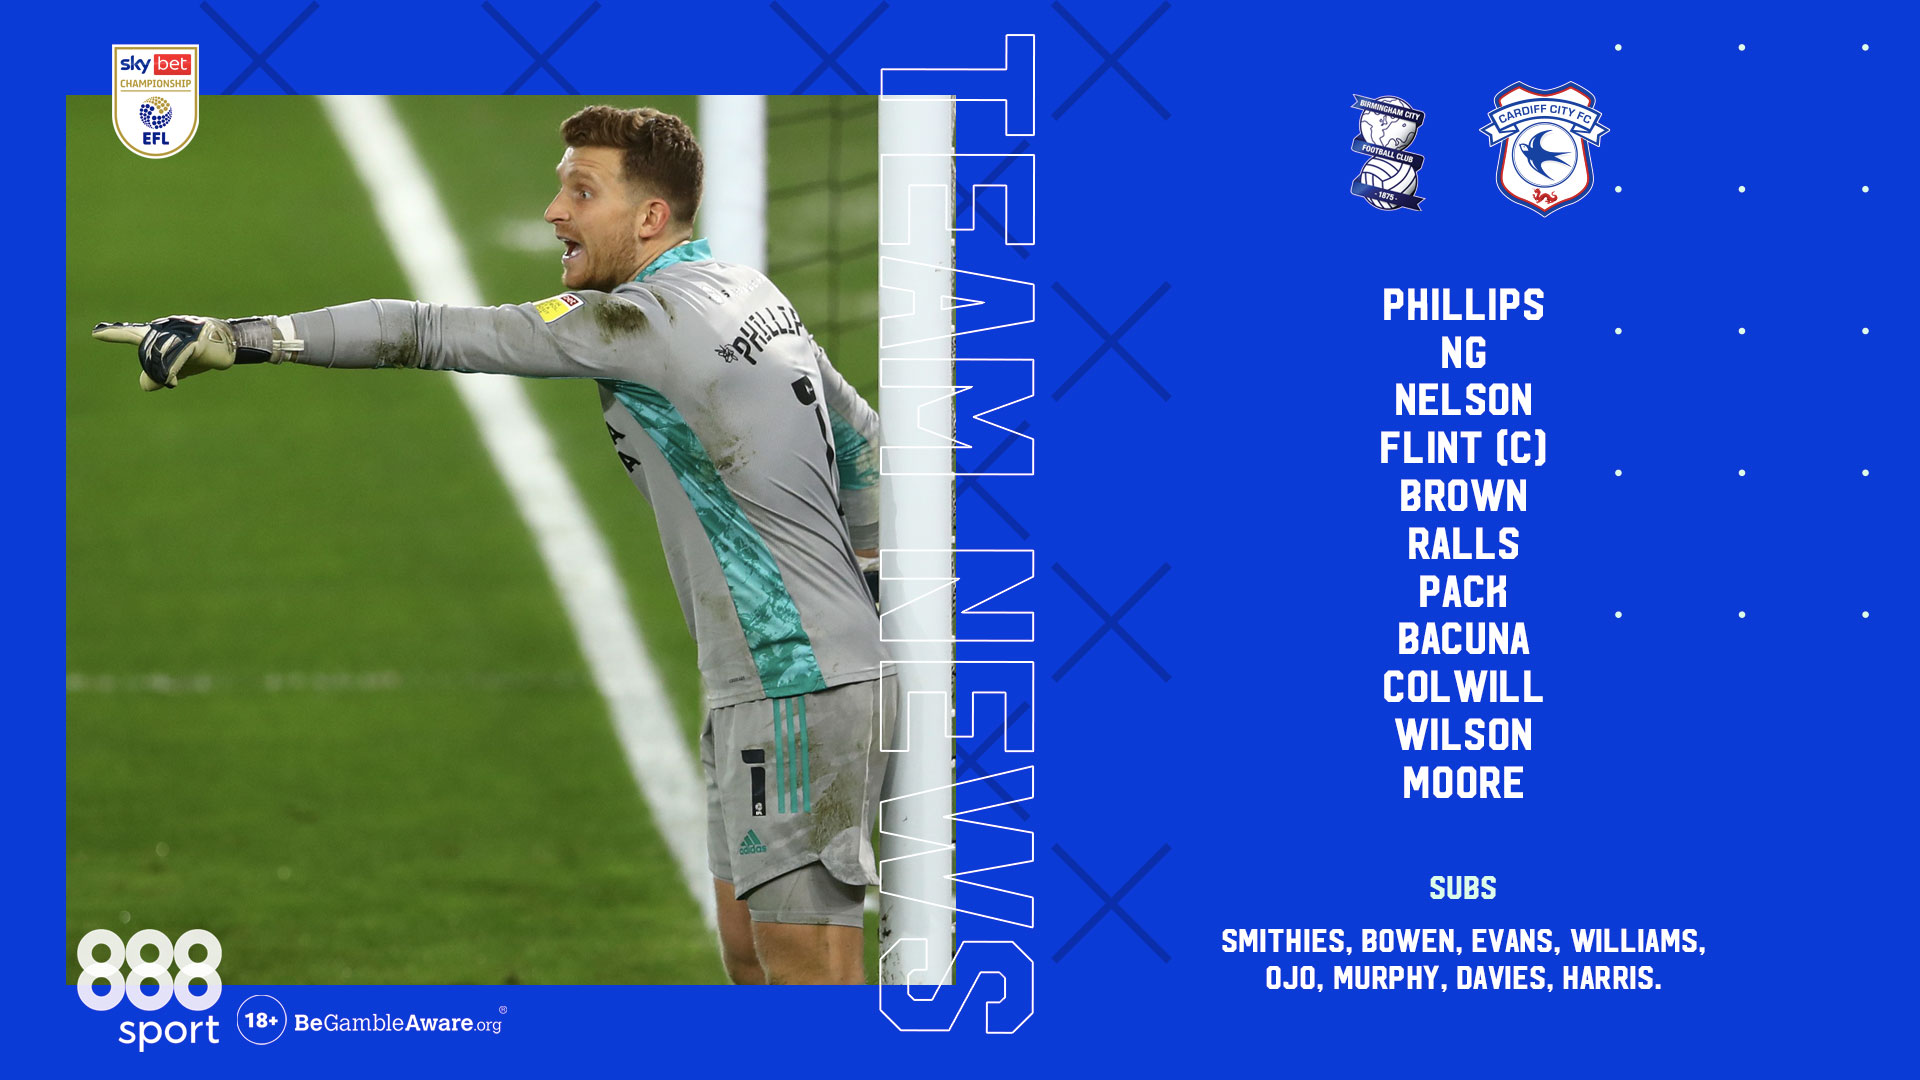 This is how the Bluebirds line-up against Birmingham City...